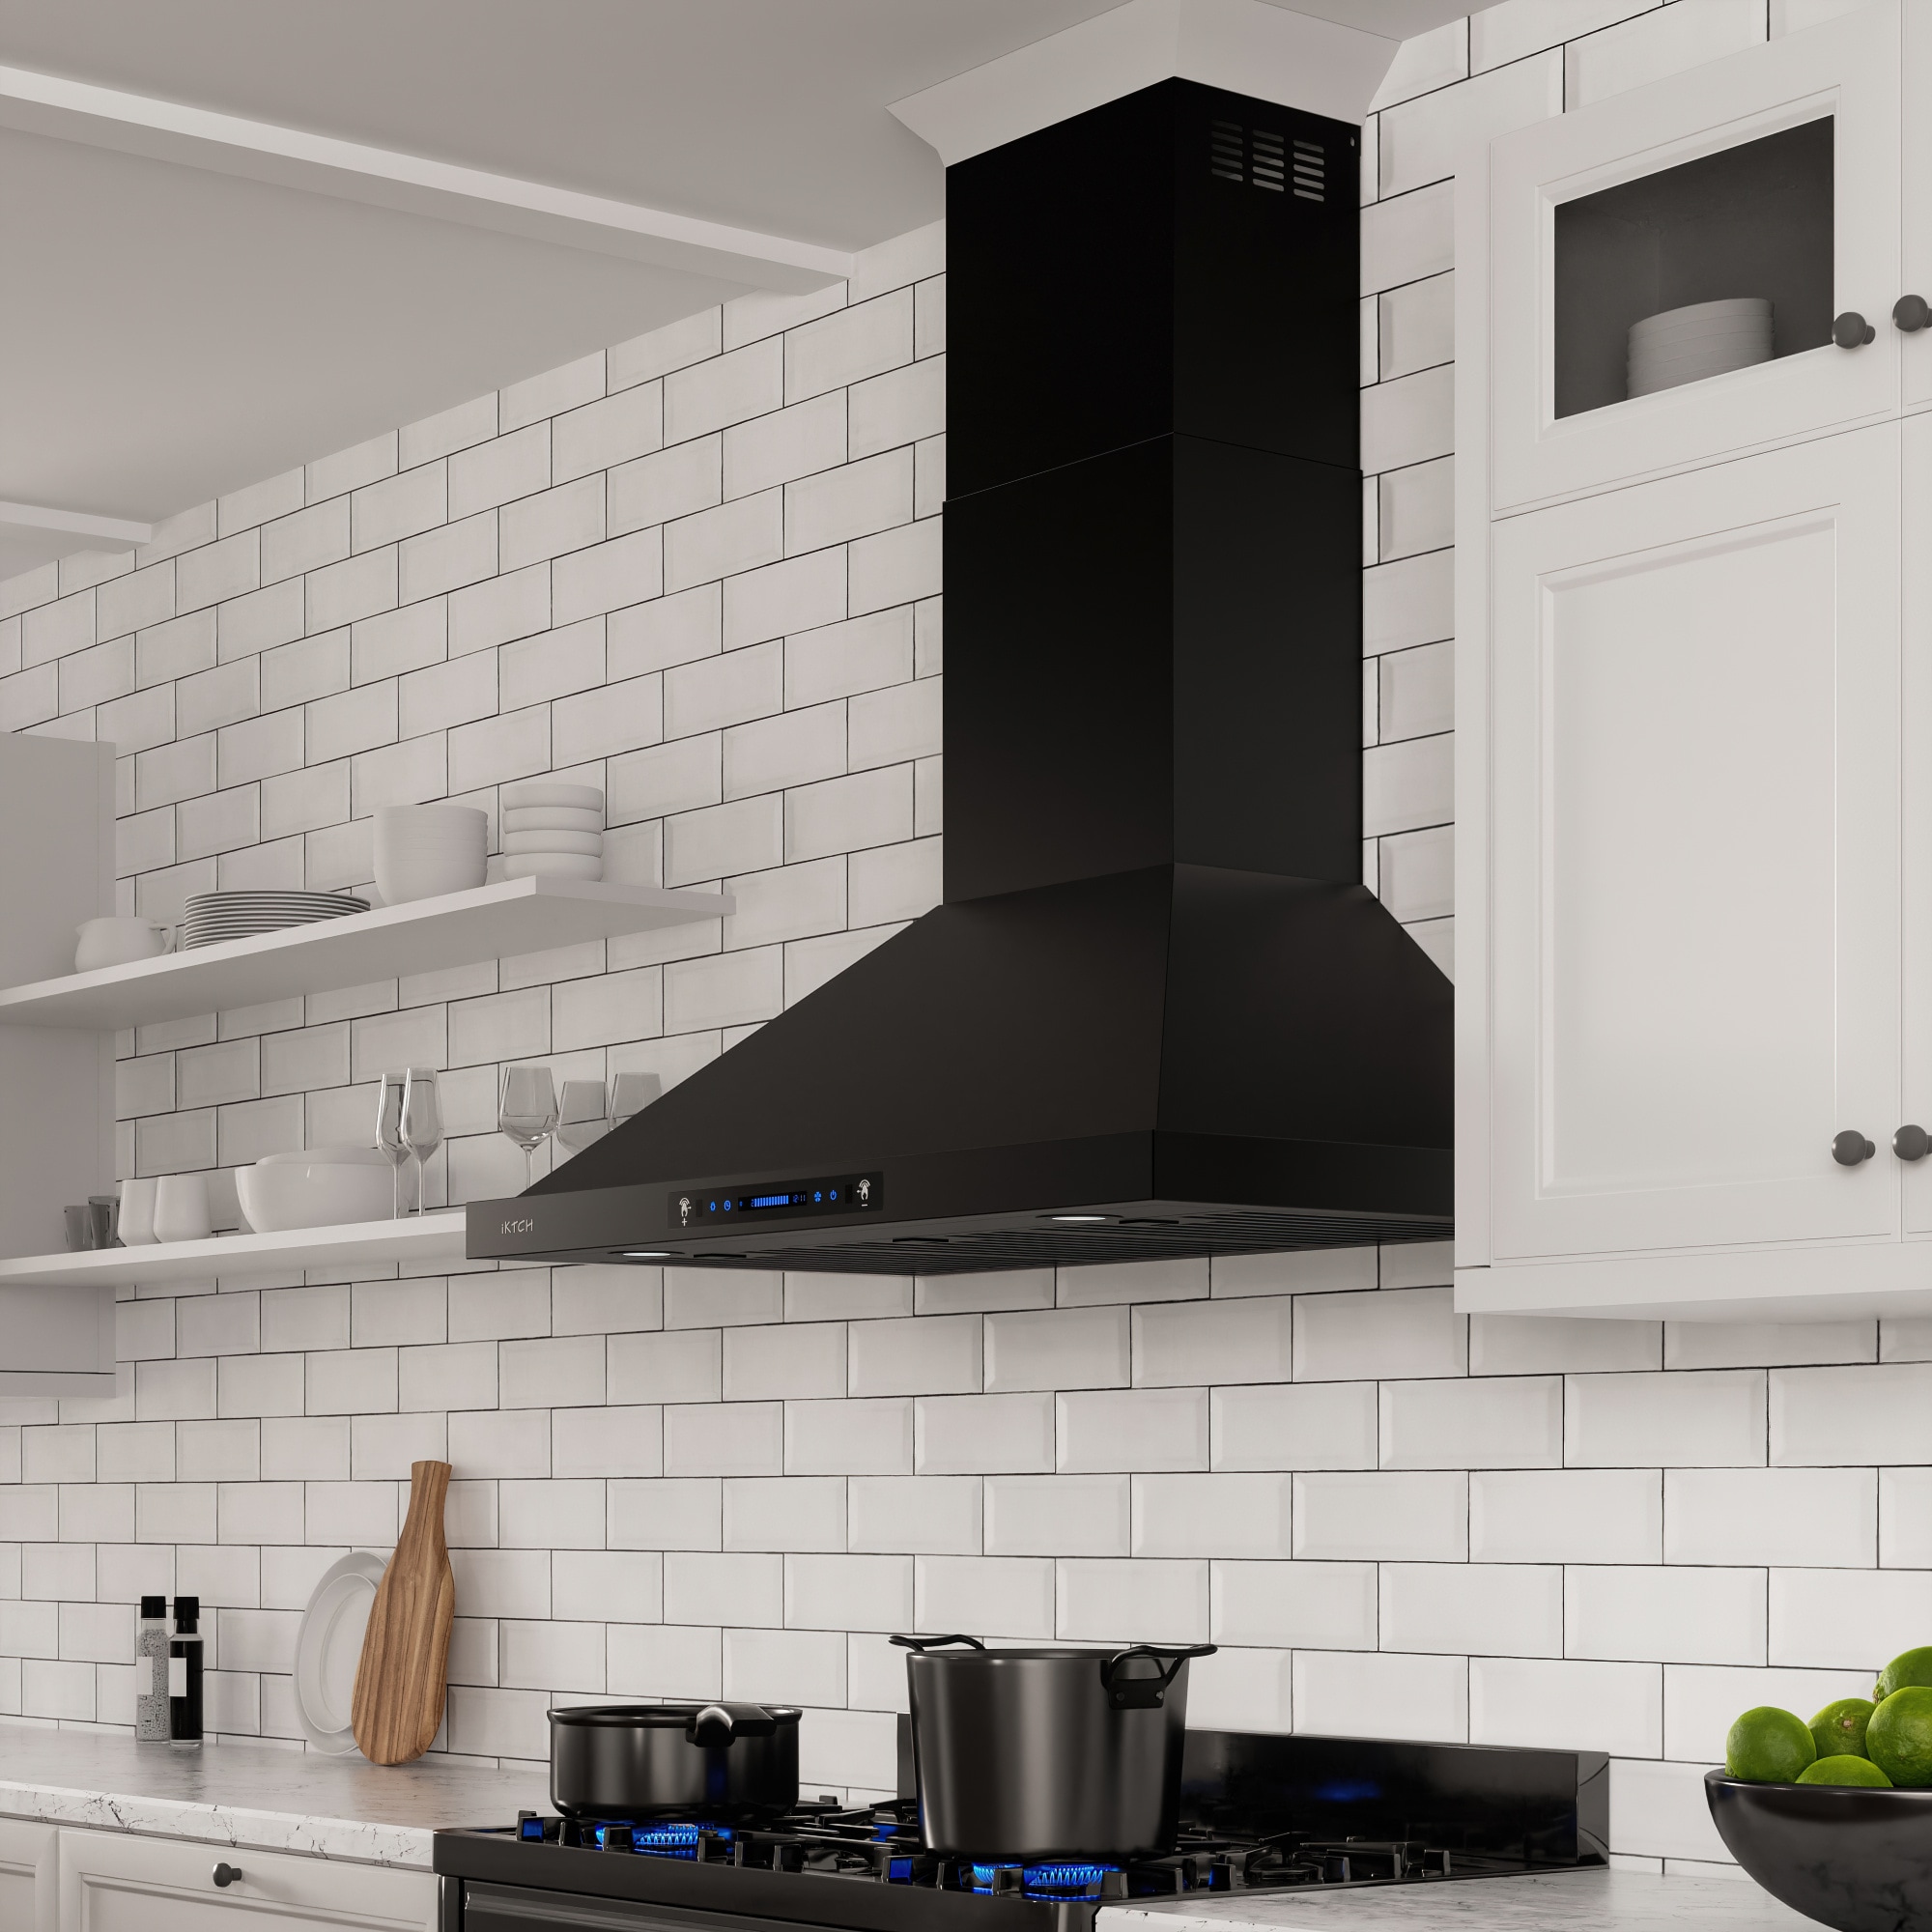 IKTCH 30-in 900-CFM Ducted Stainless Steel Wall-Mounted Range Hood with Charcoal Filter | P02R30